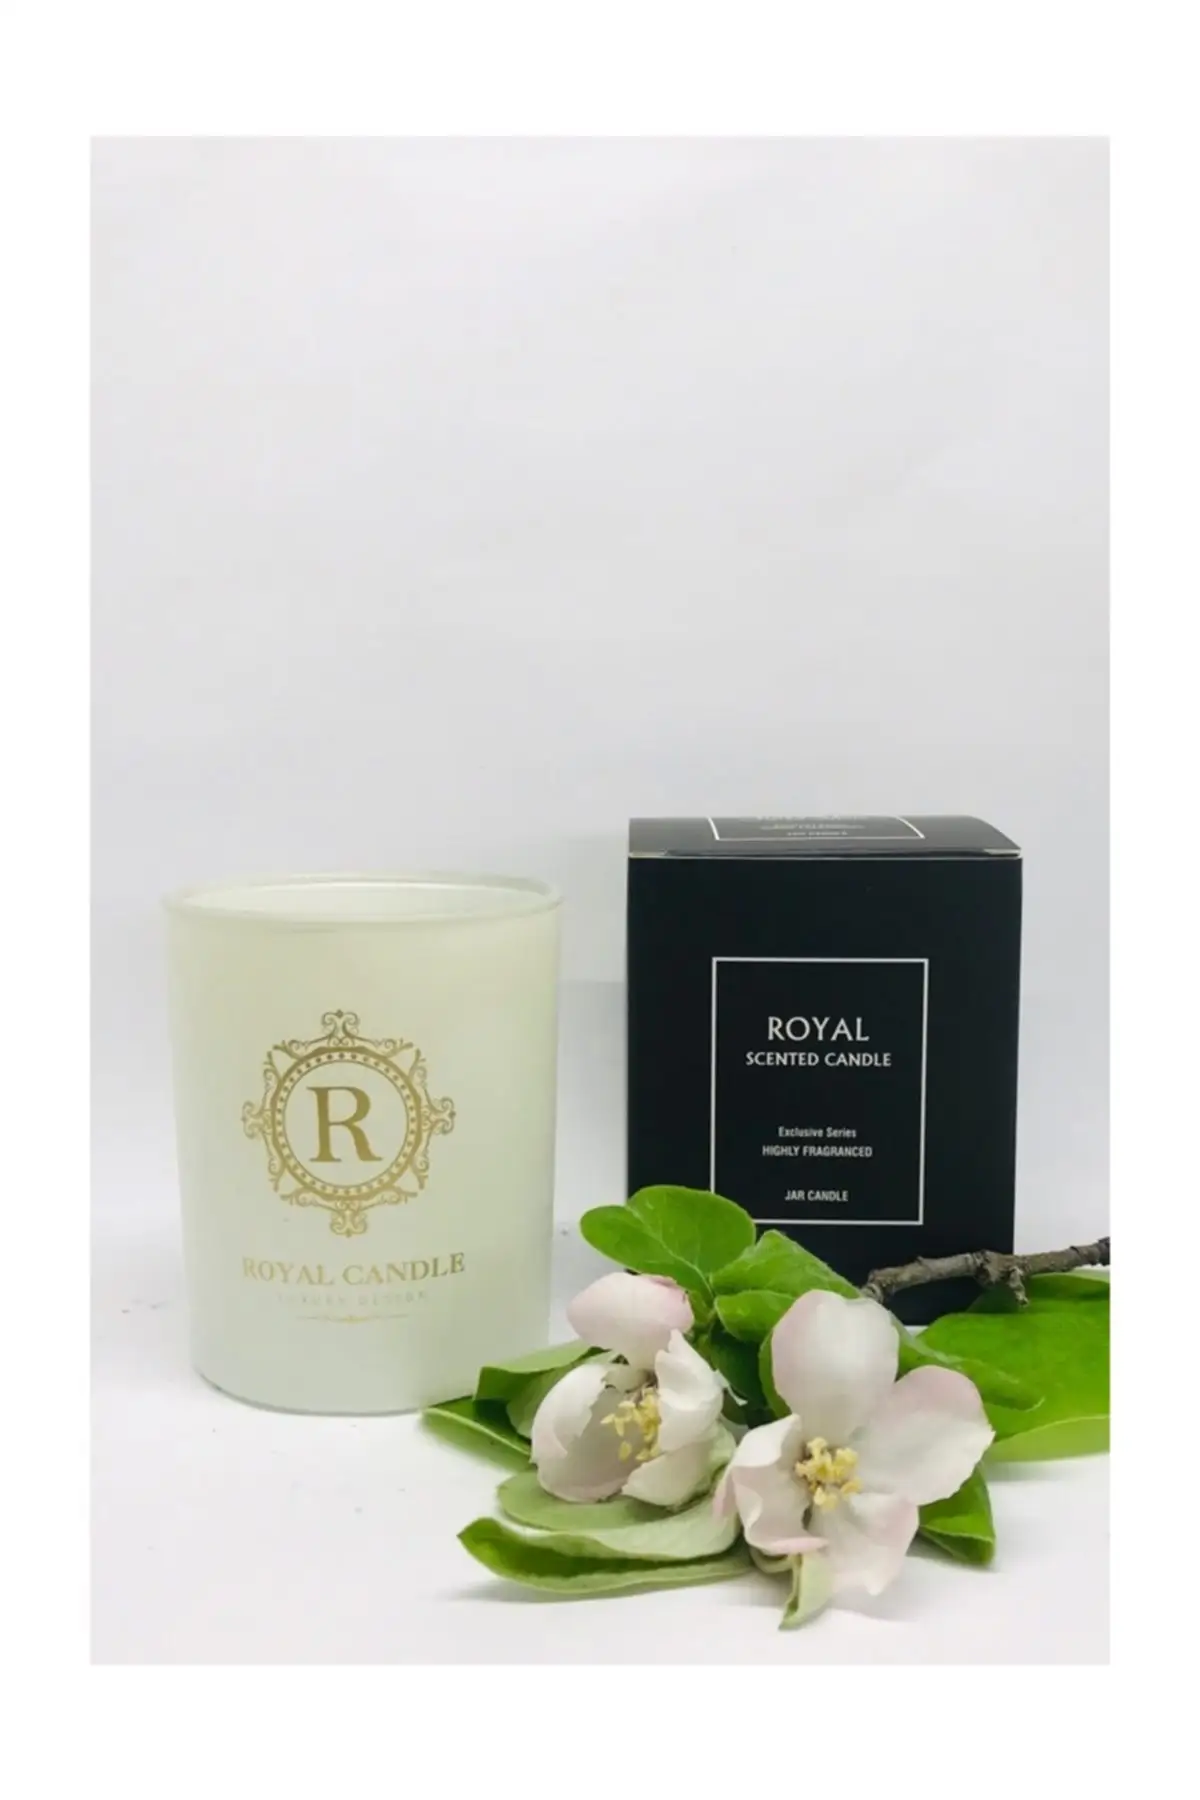 

Antibacterial - Glass Candle- Anti Stress Mint Lemon Tea Scented Mix Relaxing Candle Romantic Gift Products